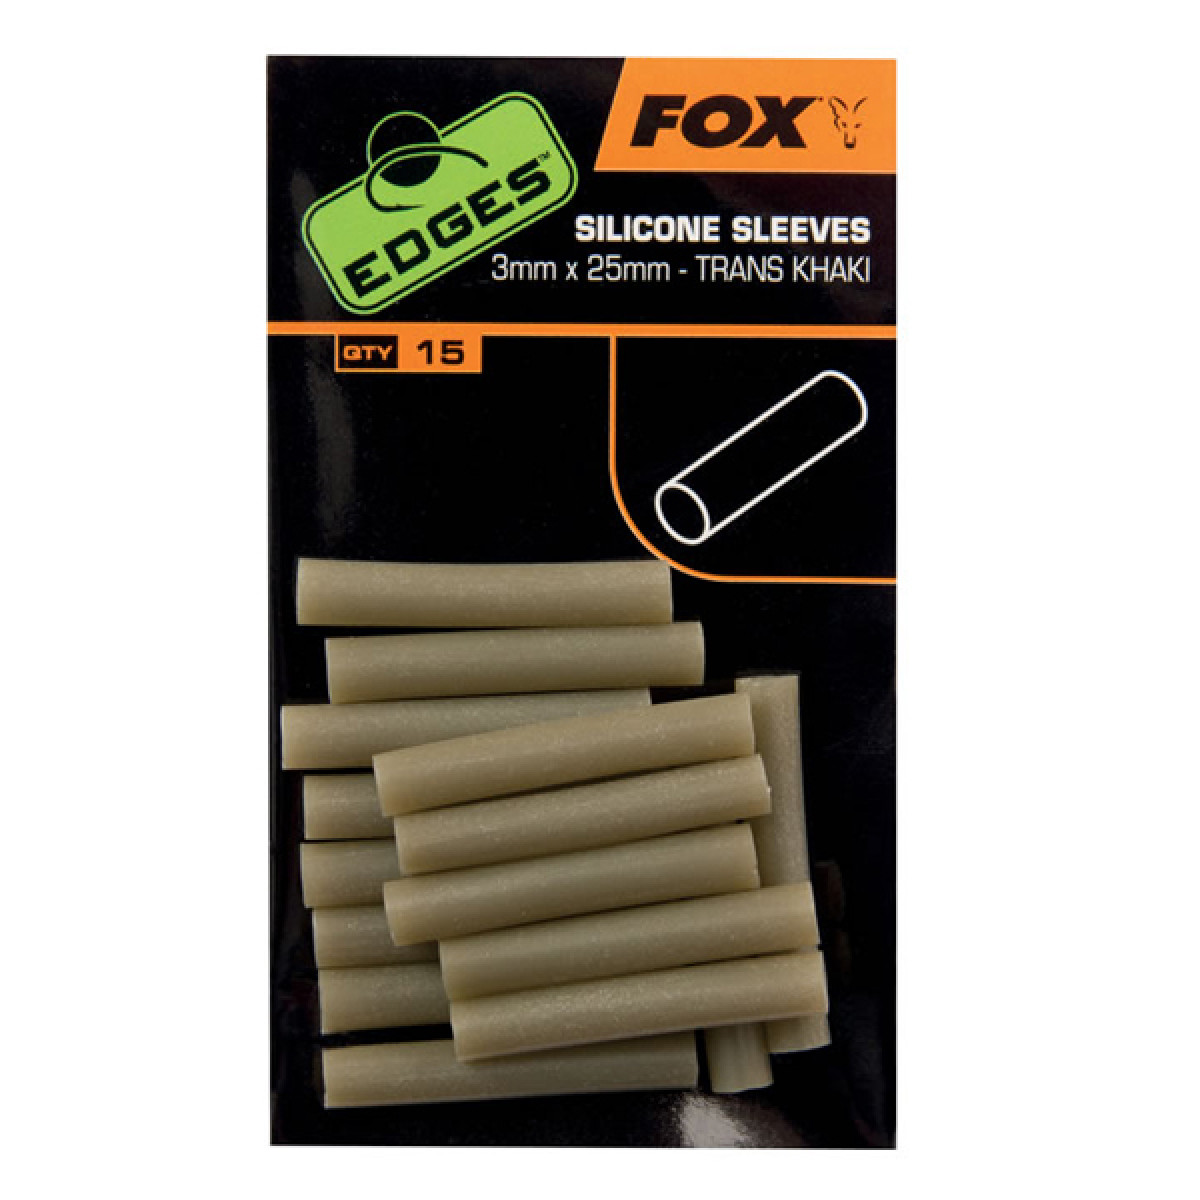 FOX SILICONE SLEEVES